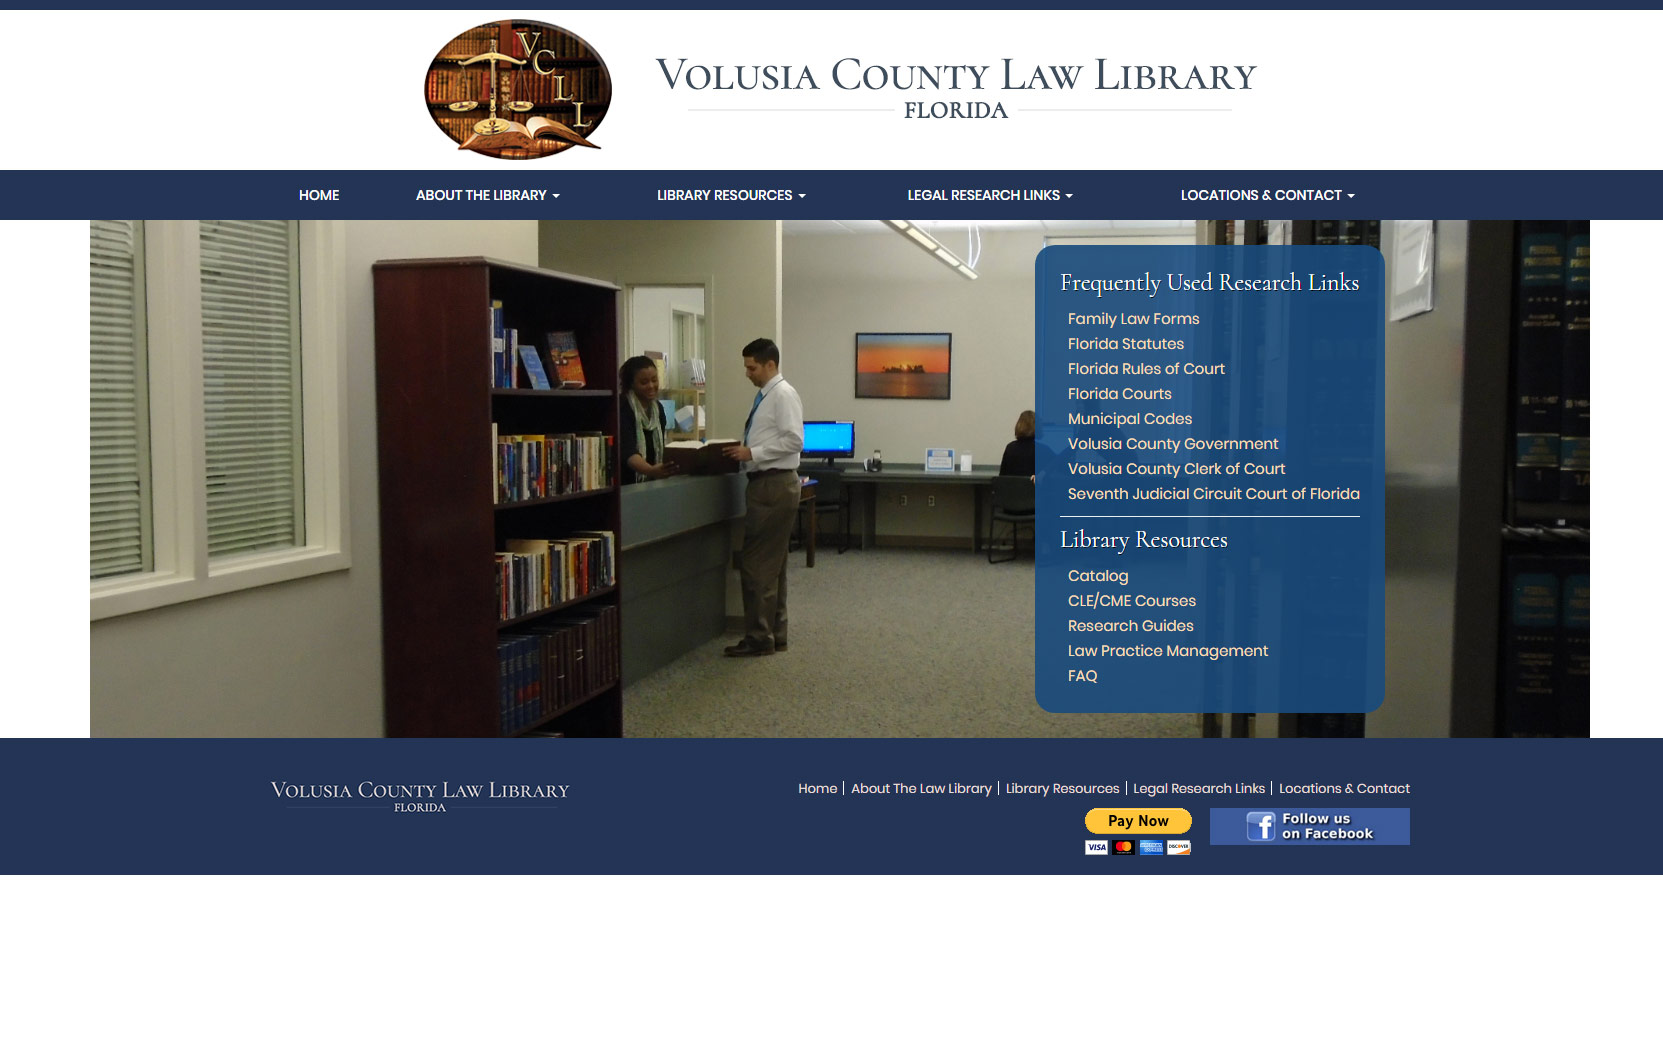 Volusia County Law Library